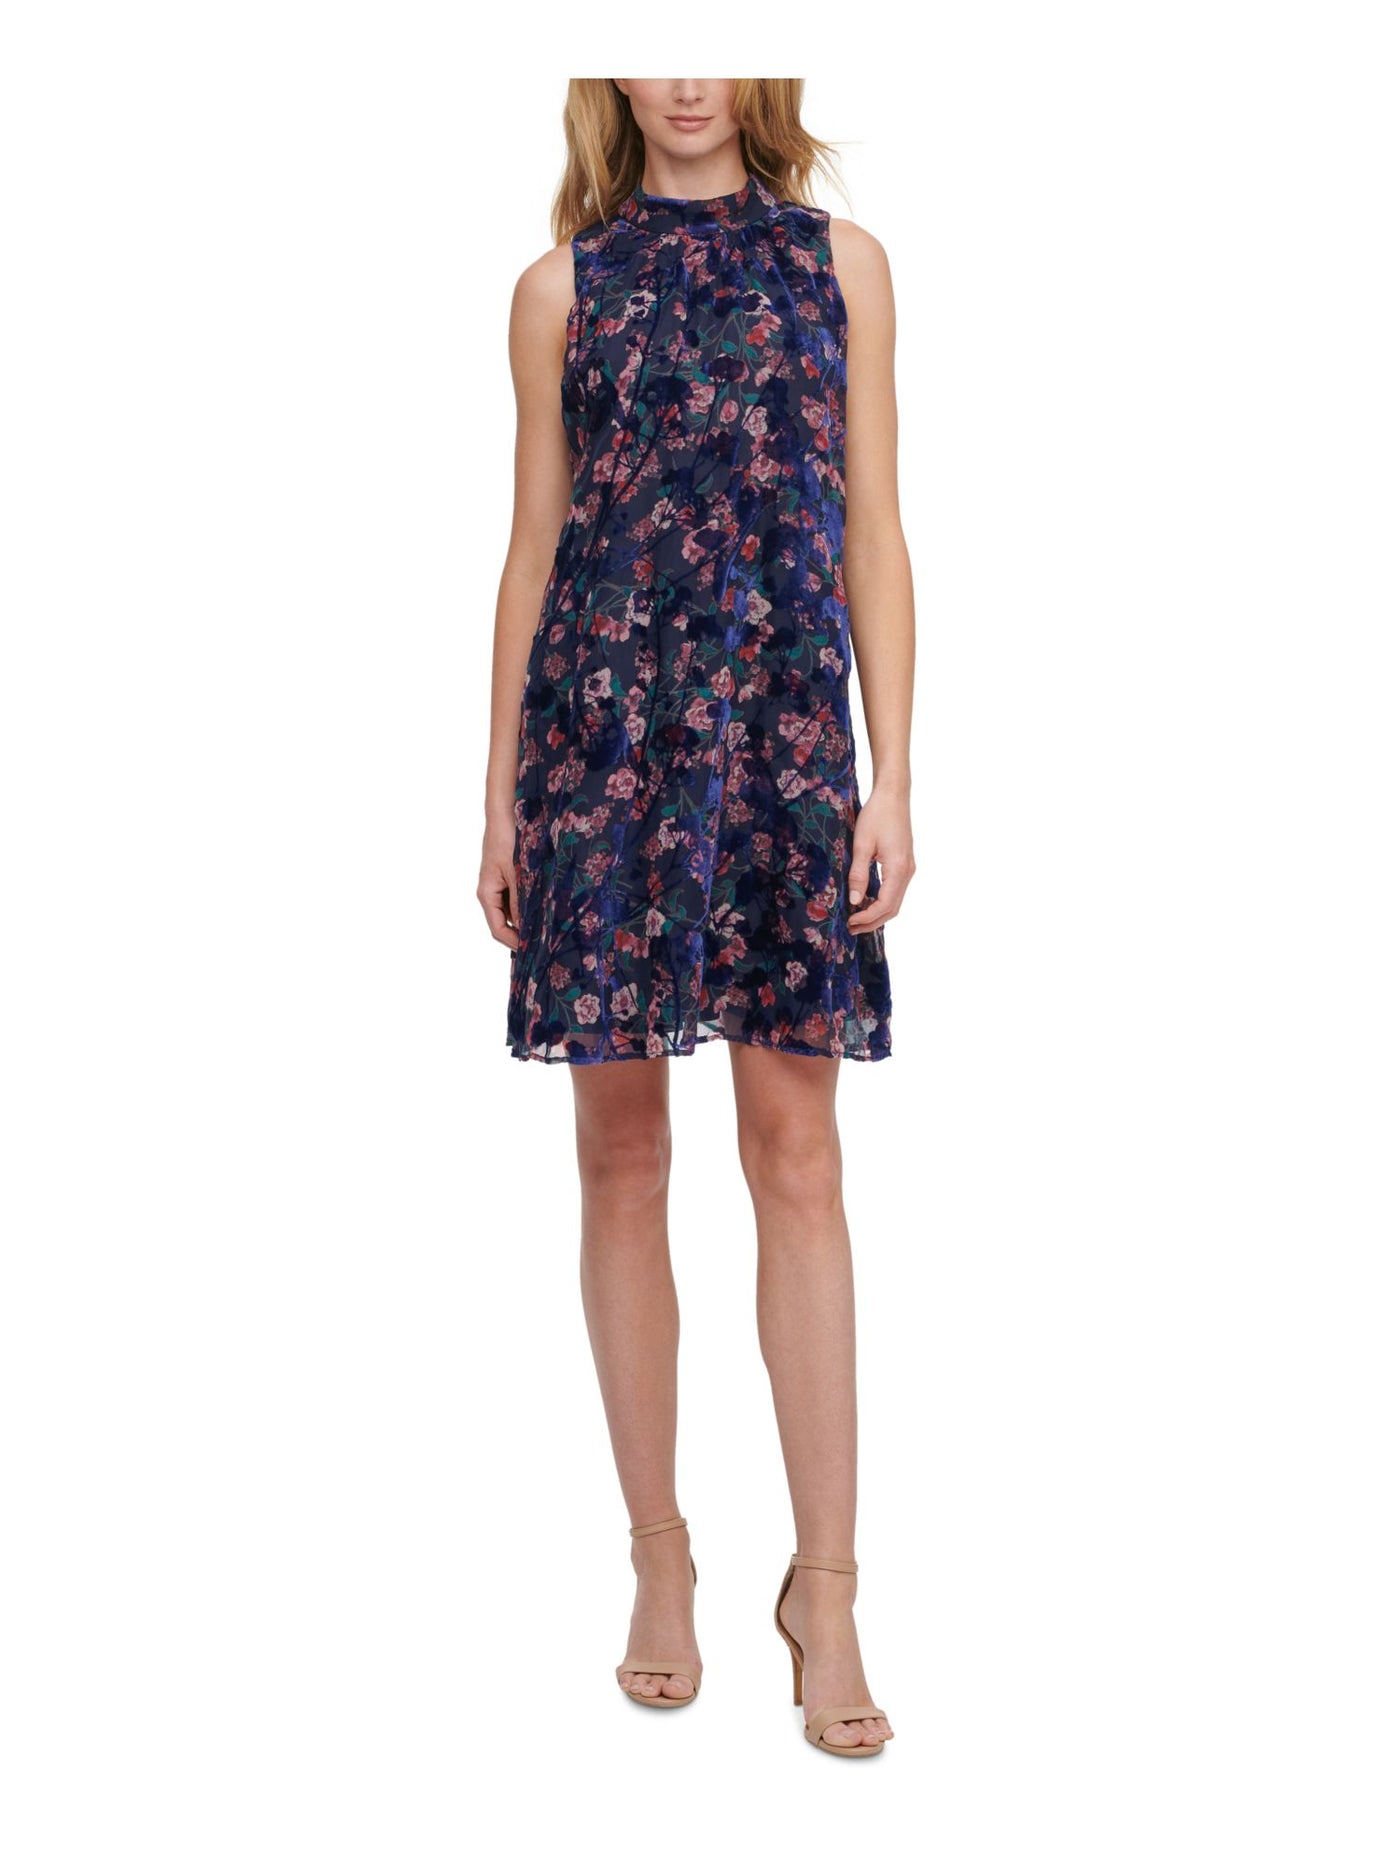 TOMMY HILFIGER Womens Navy Textured Mock-neck Burnout Floral Sleeveless Above The Knee A-Line Dress 8